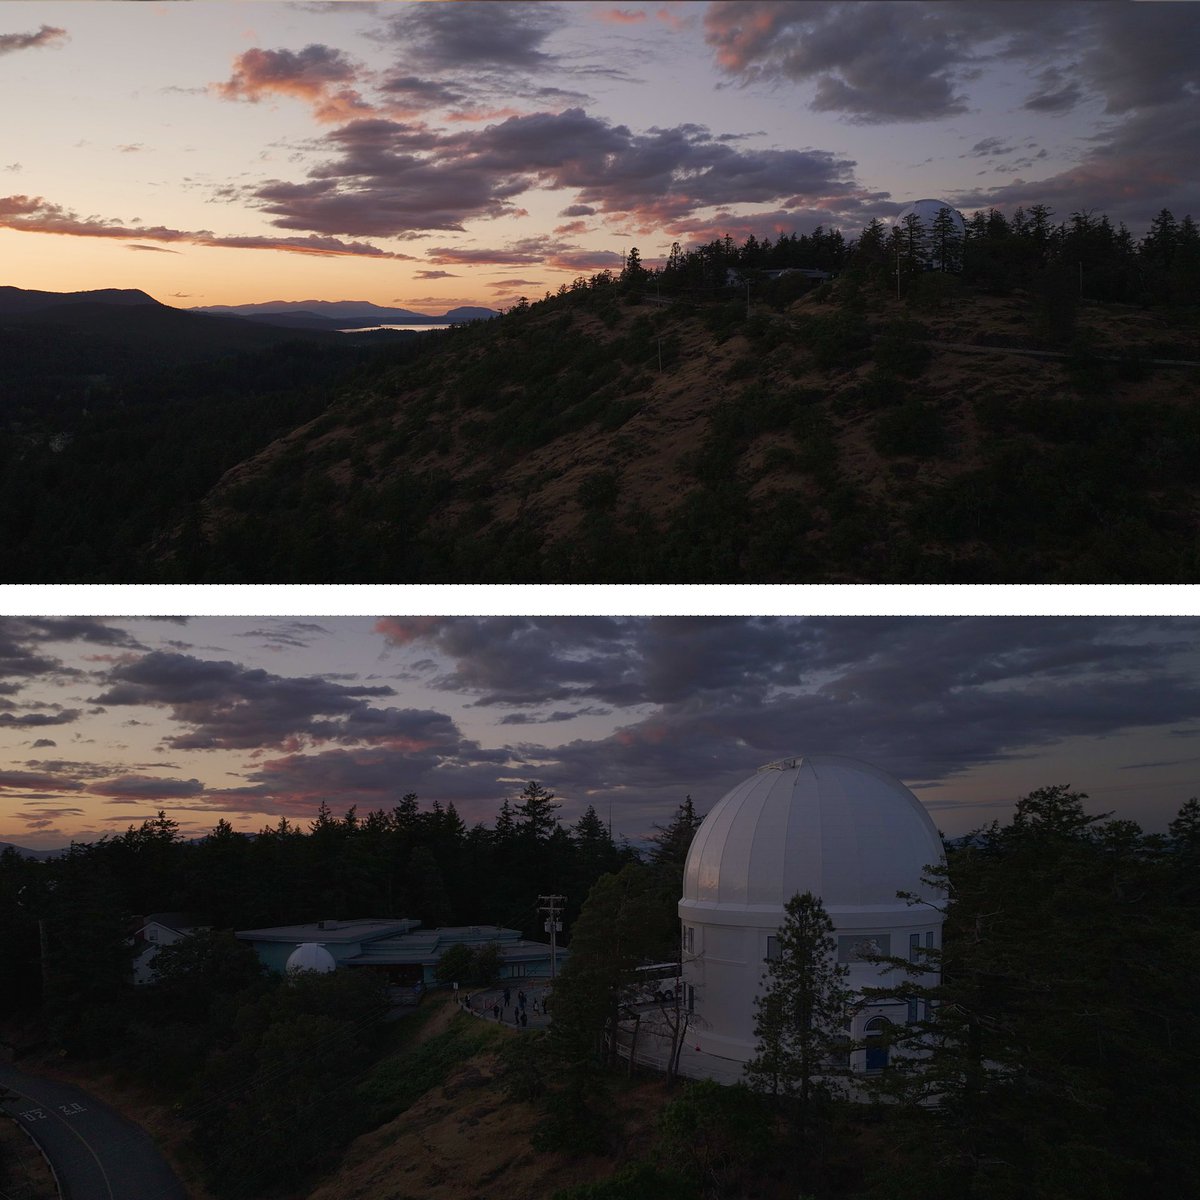 Saw some good looking clouds and light, so I threw the #DJIMavic3Pro in the car and zipped over to the Dominion Observatory for a quick sunset flight.  Got some nice shots, I think.

#aerialphotography #aerialcinematography #cinematography